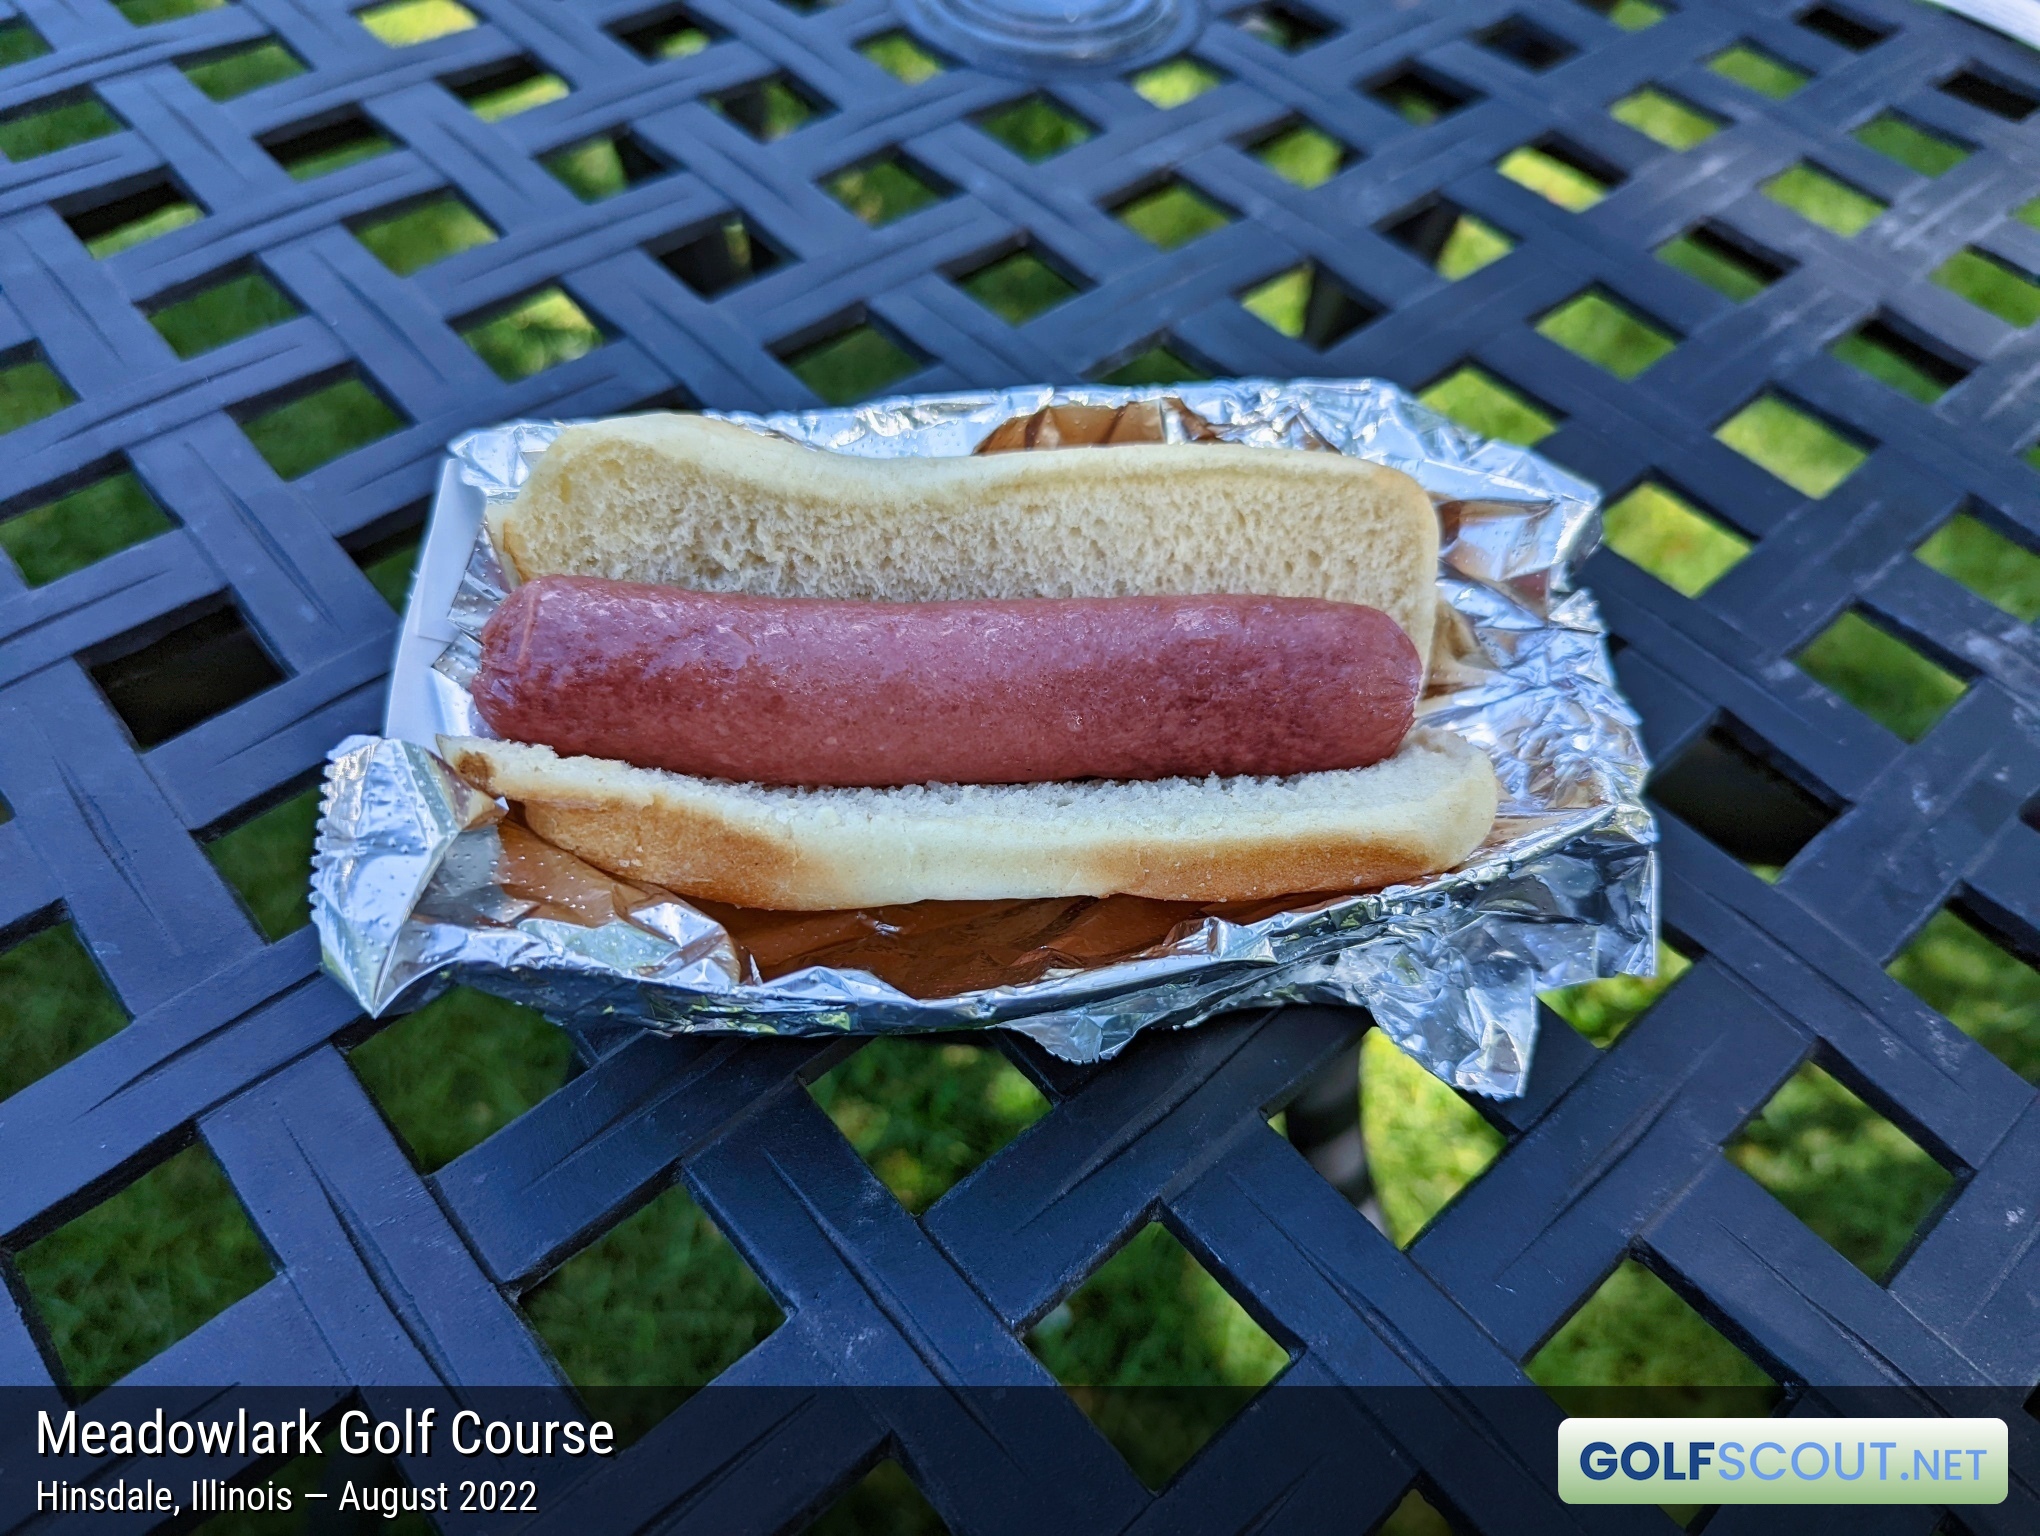 Photo of the food and dining at Meadowlark Golf Course in Hinsdale, Illinois. Photo of the hot dog at Meadowlark Golf Course in Hinsdale, Illinois.